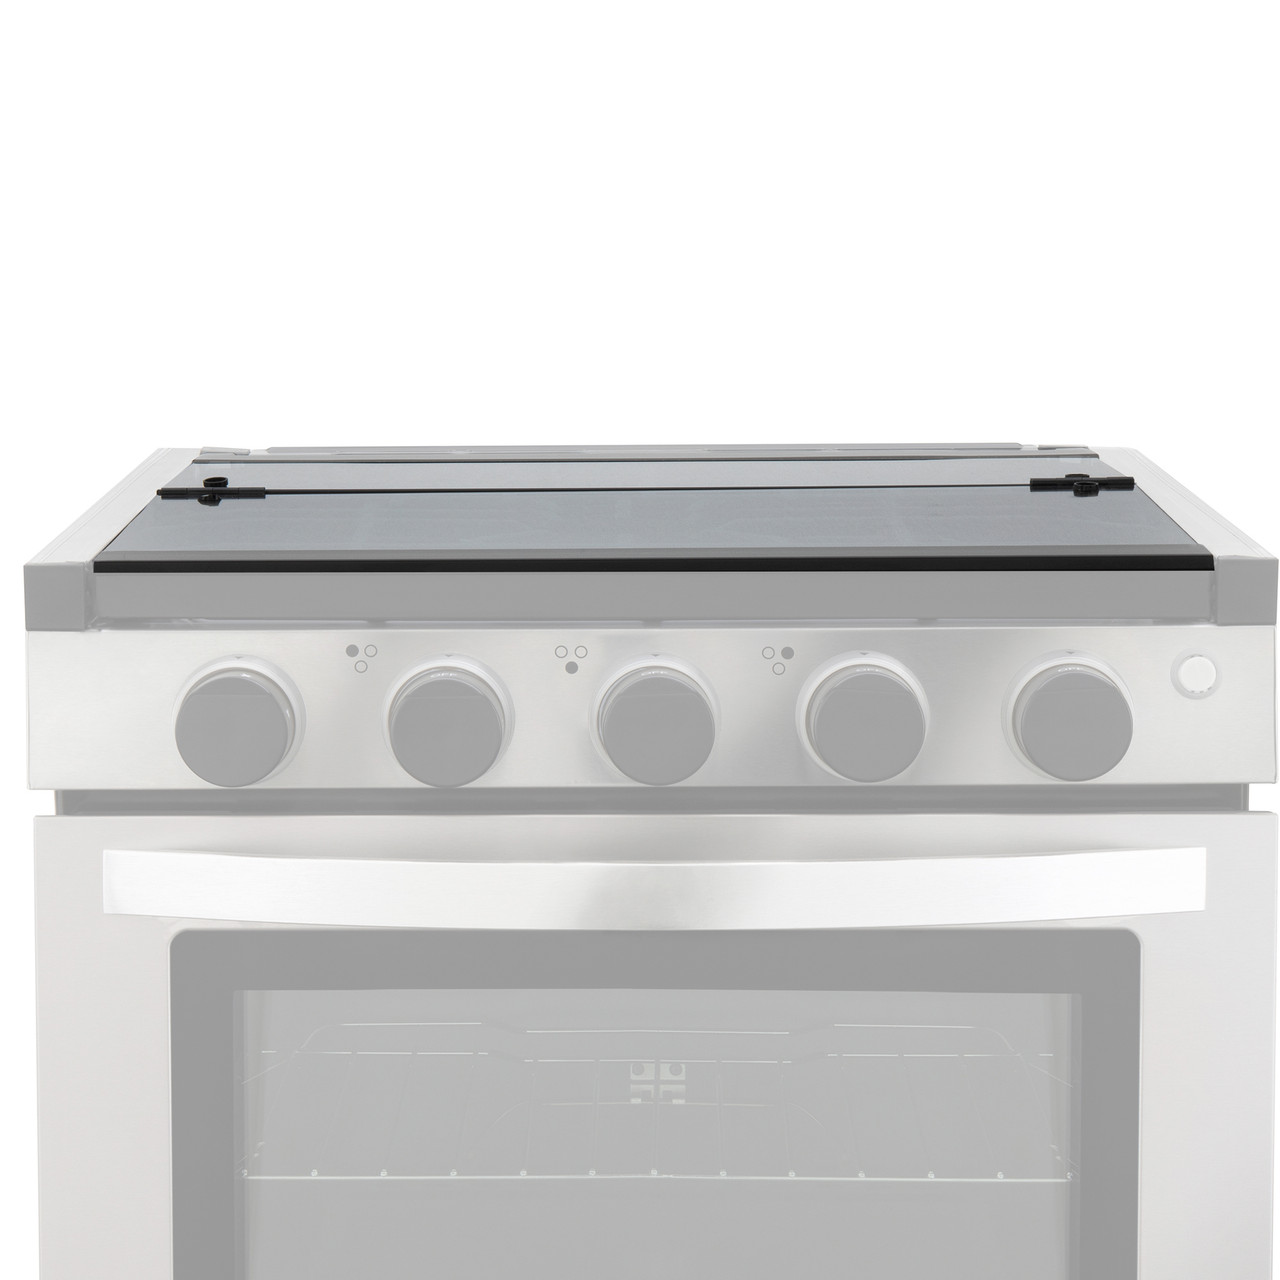 Review of Furrion RV Stoves and Ovens - Replacement Black Top